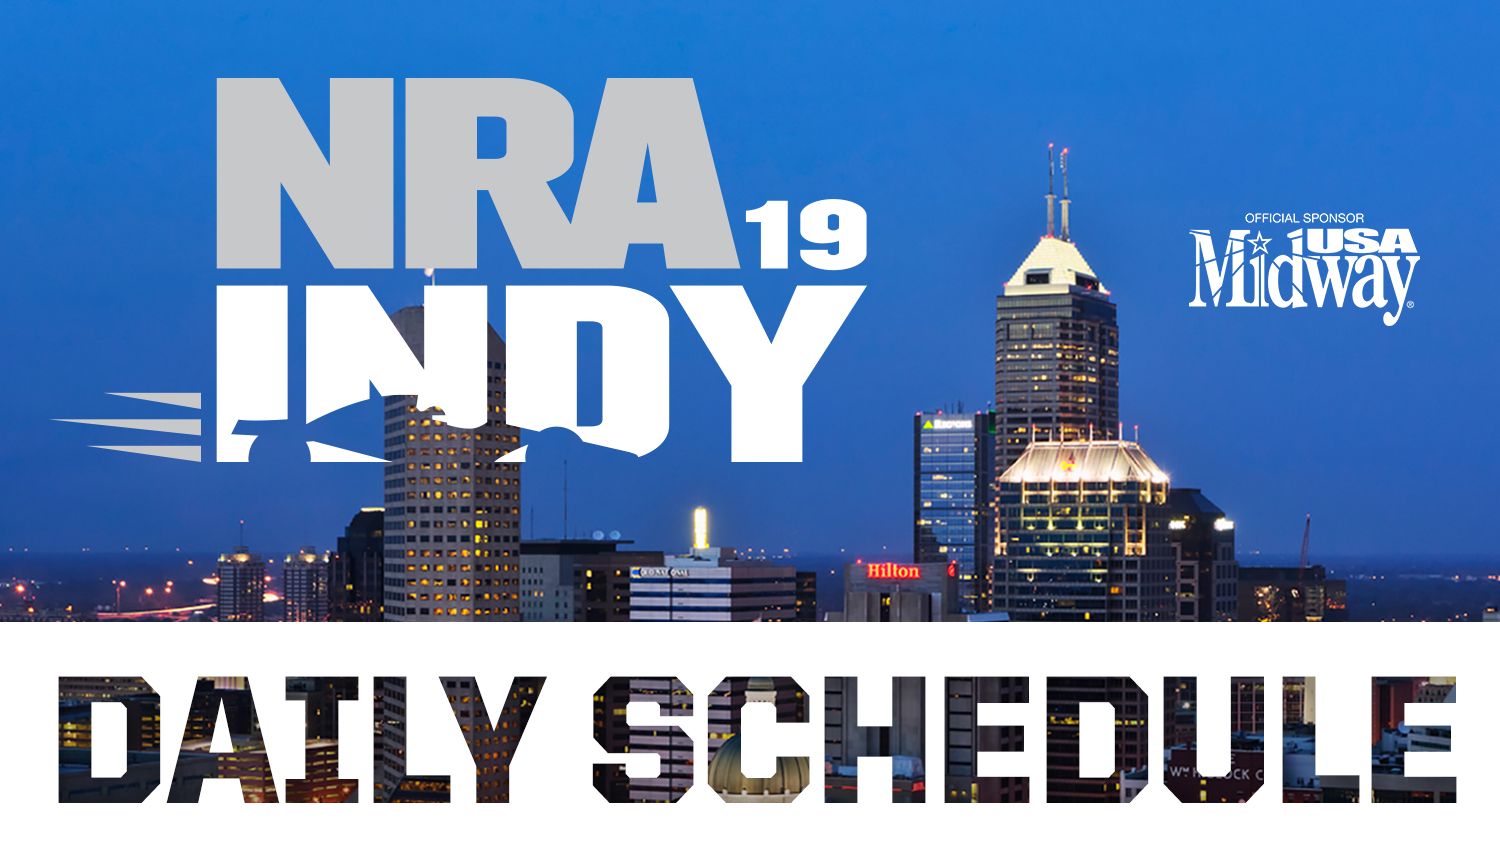 NRA Annual Meeting Events: Sunday, April 28